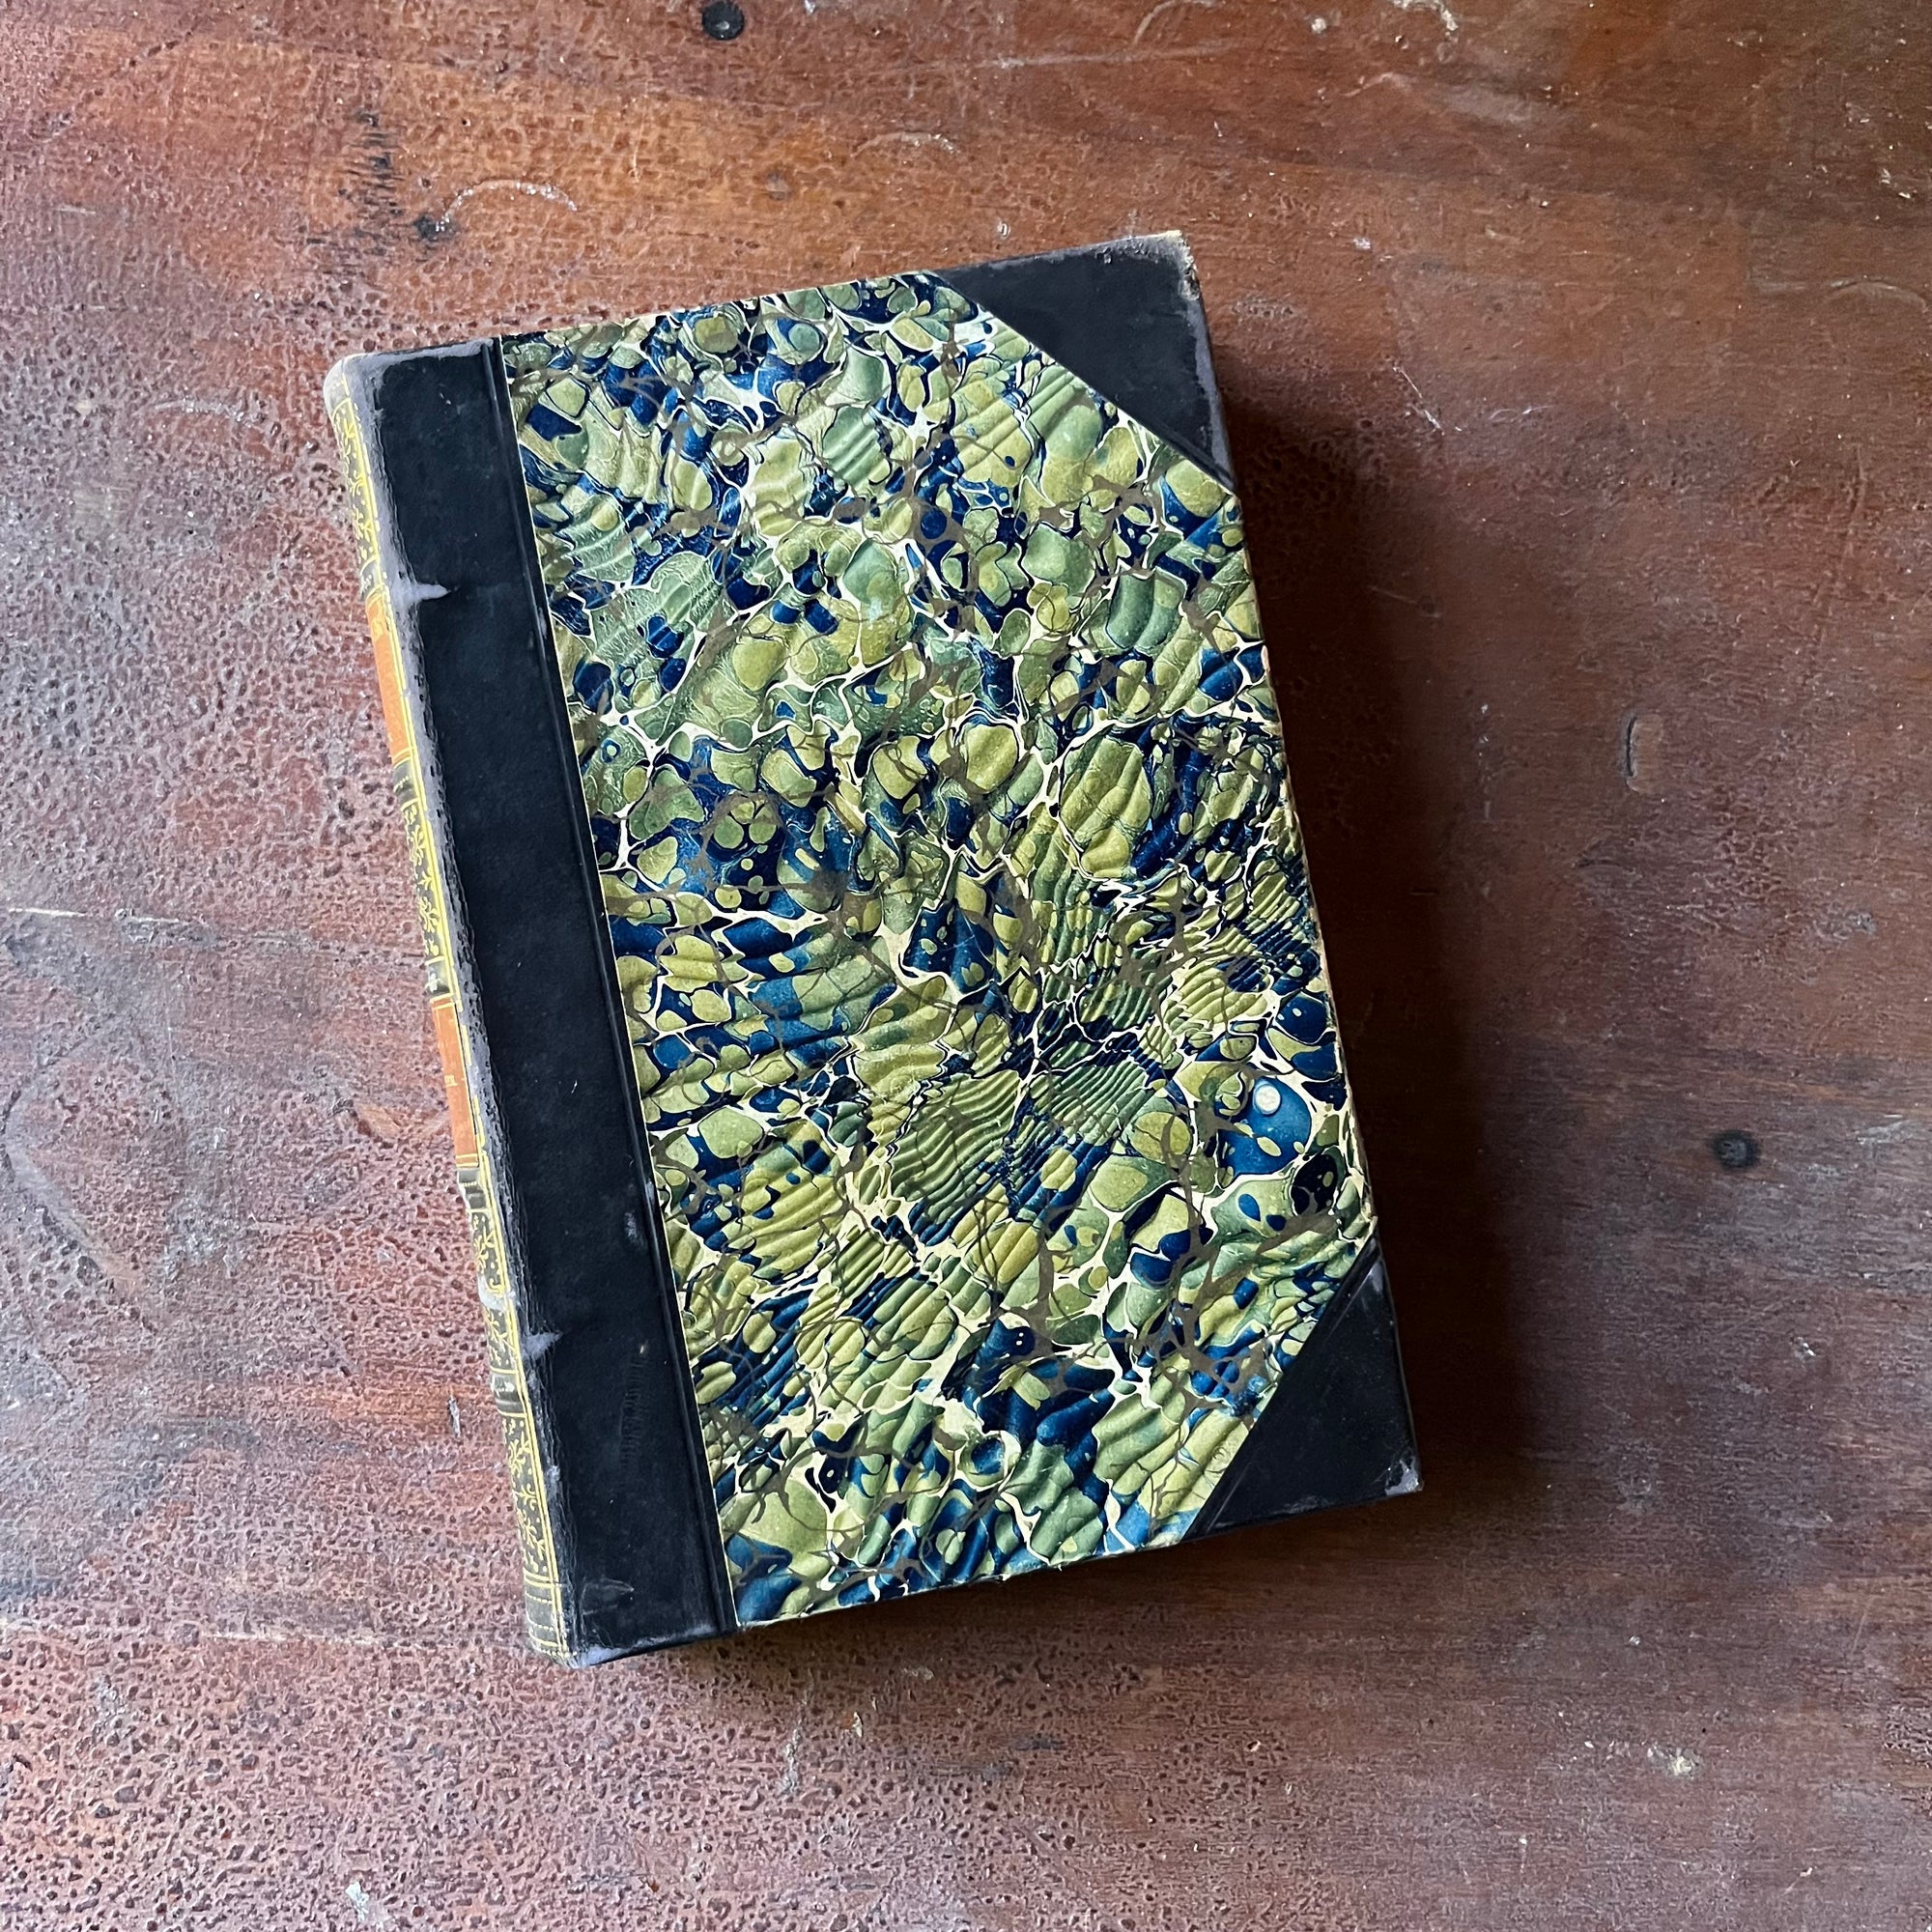 The Deerslayer or The War Path by James Fenimore Cooper - View of the Marbled Front Cover with Leather Binding